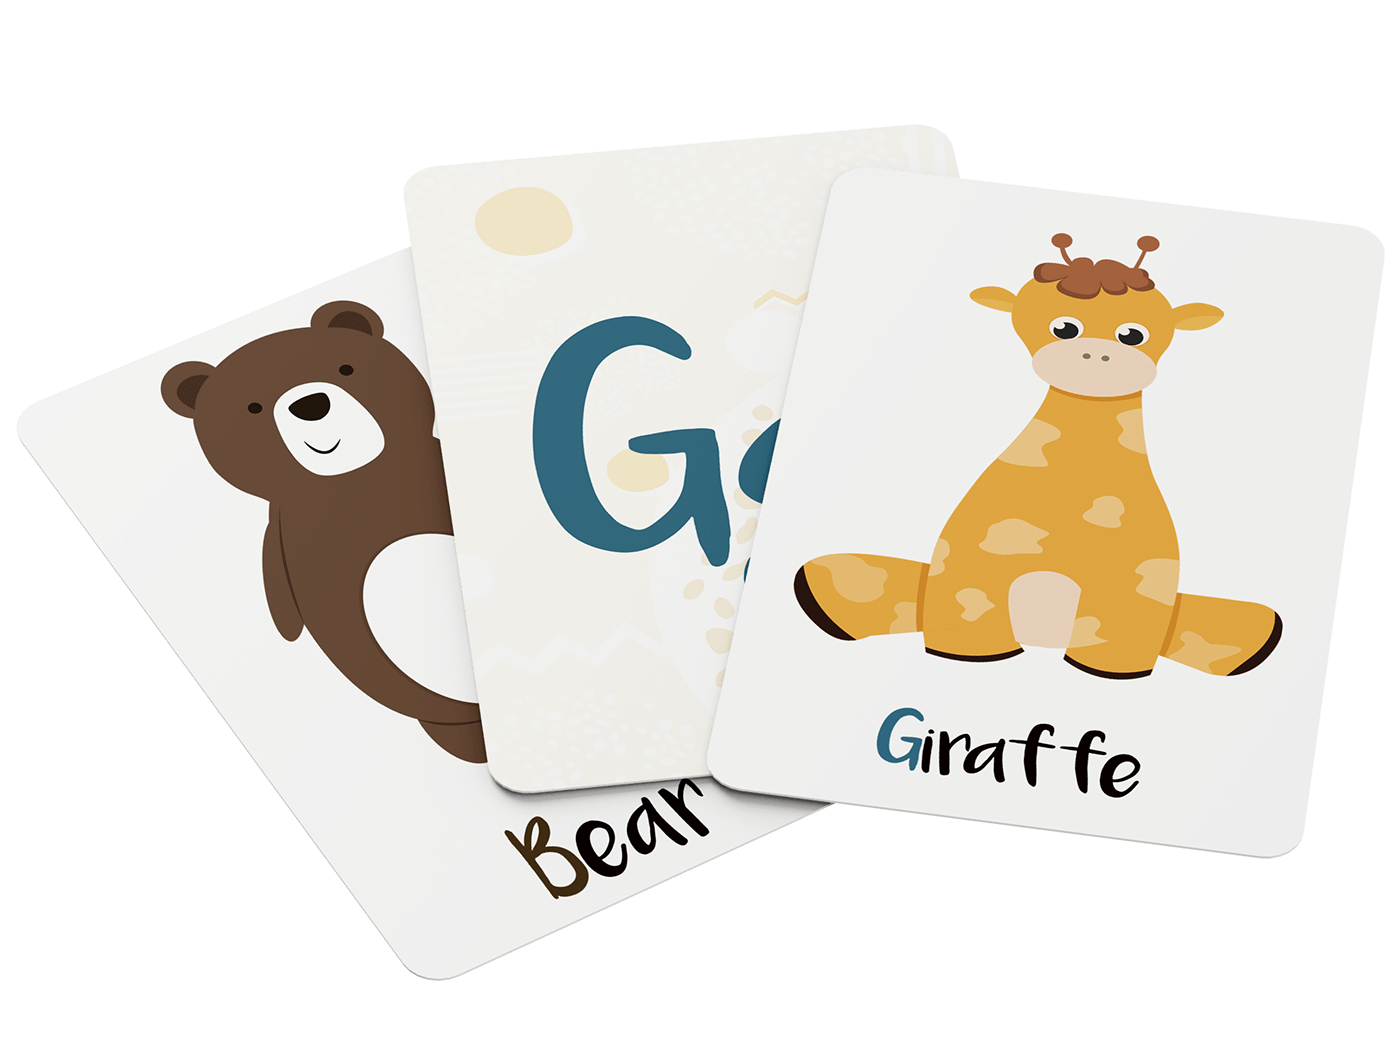 alphabet animal child Education game learning letter primary school school studying letters